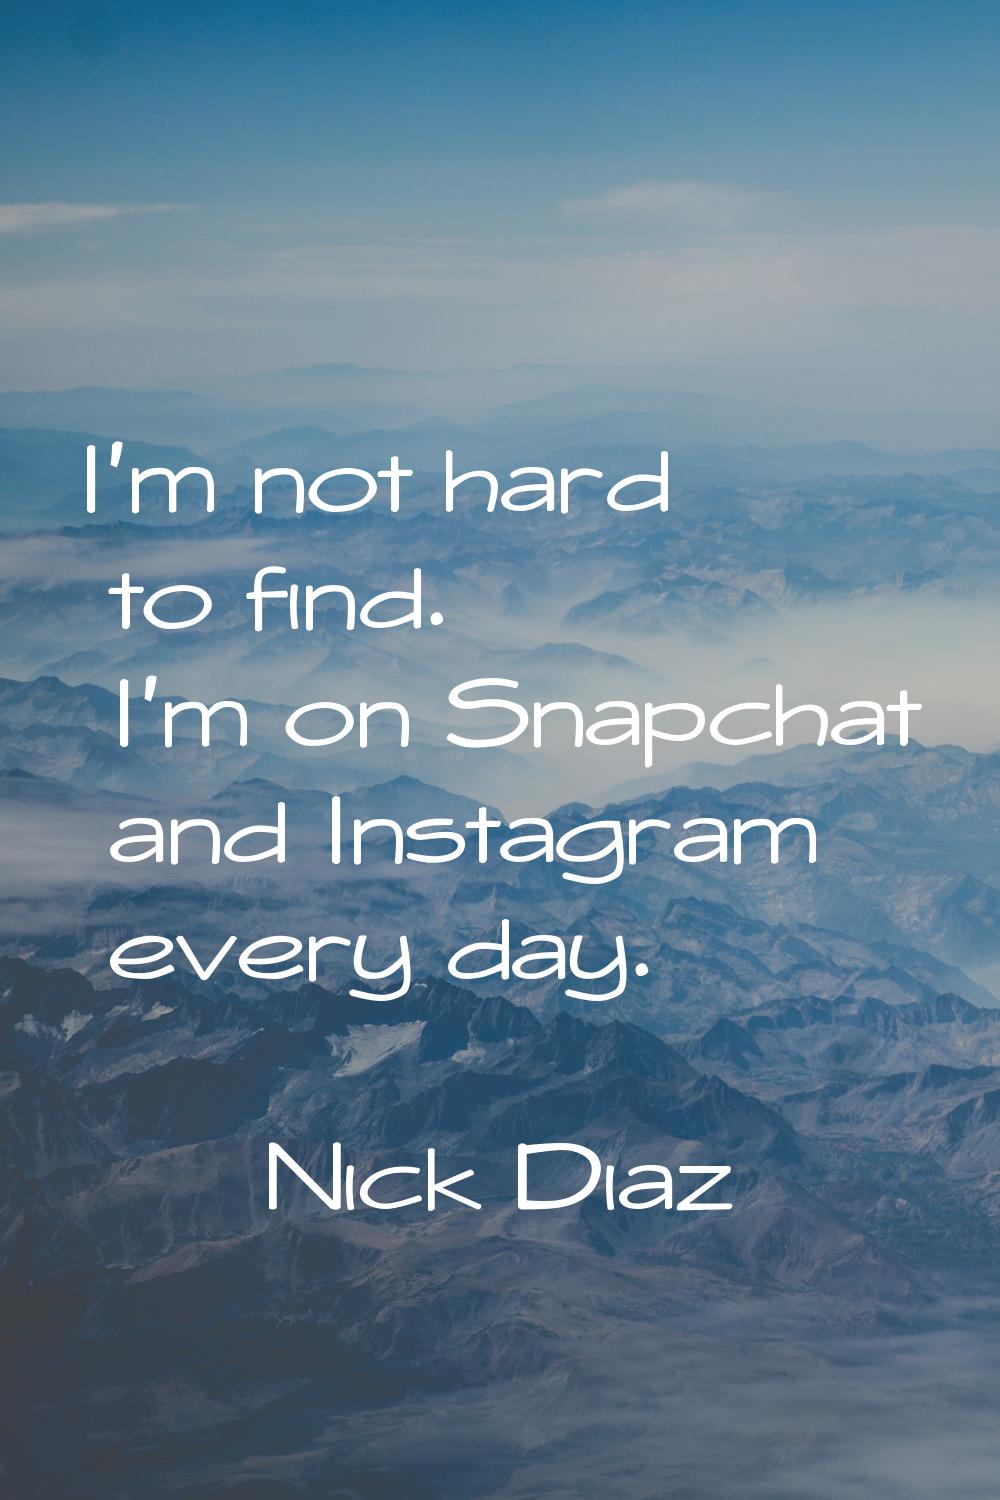 I'm not hard to find. I'm on Snapchat and Instagram every day.